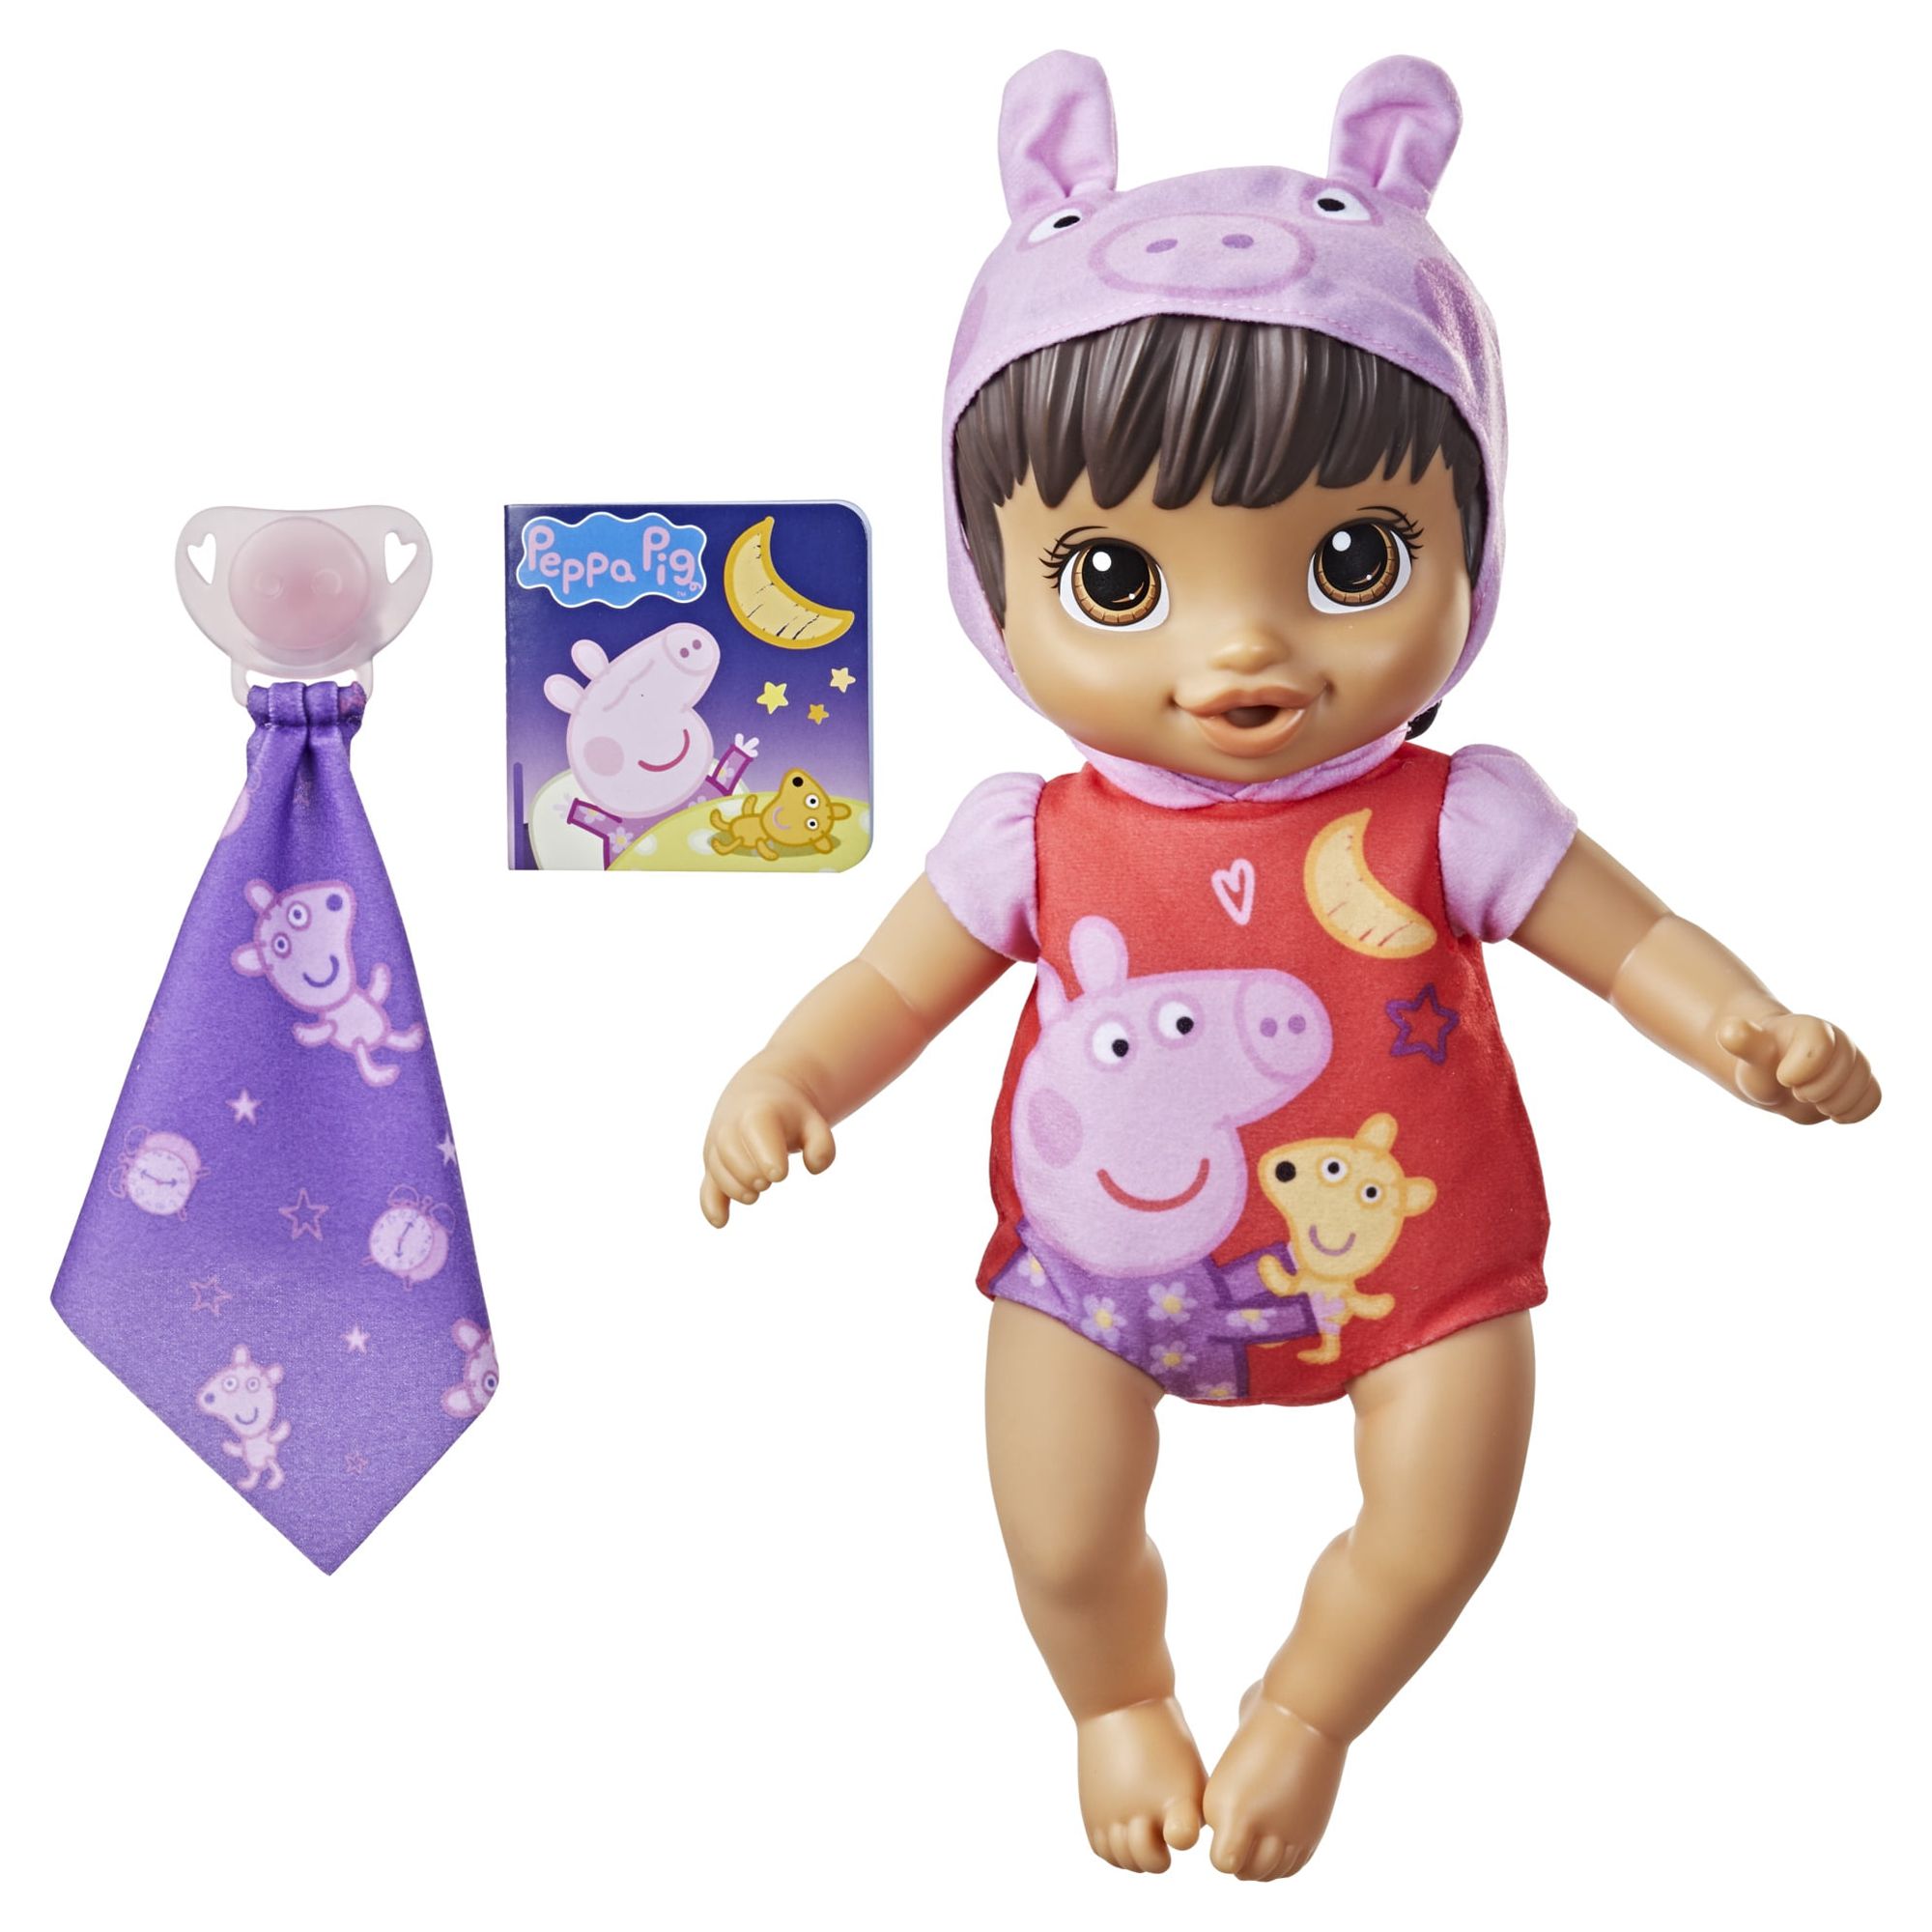 Baby Alive Goodnight Peppa Doll, Peppa Pig Toy, Brown Hair, Only At Walmart - image 1 of 8